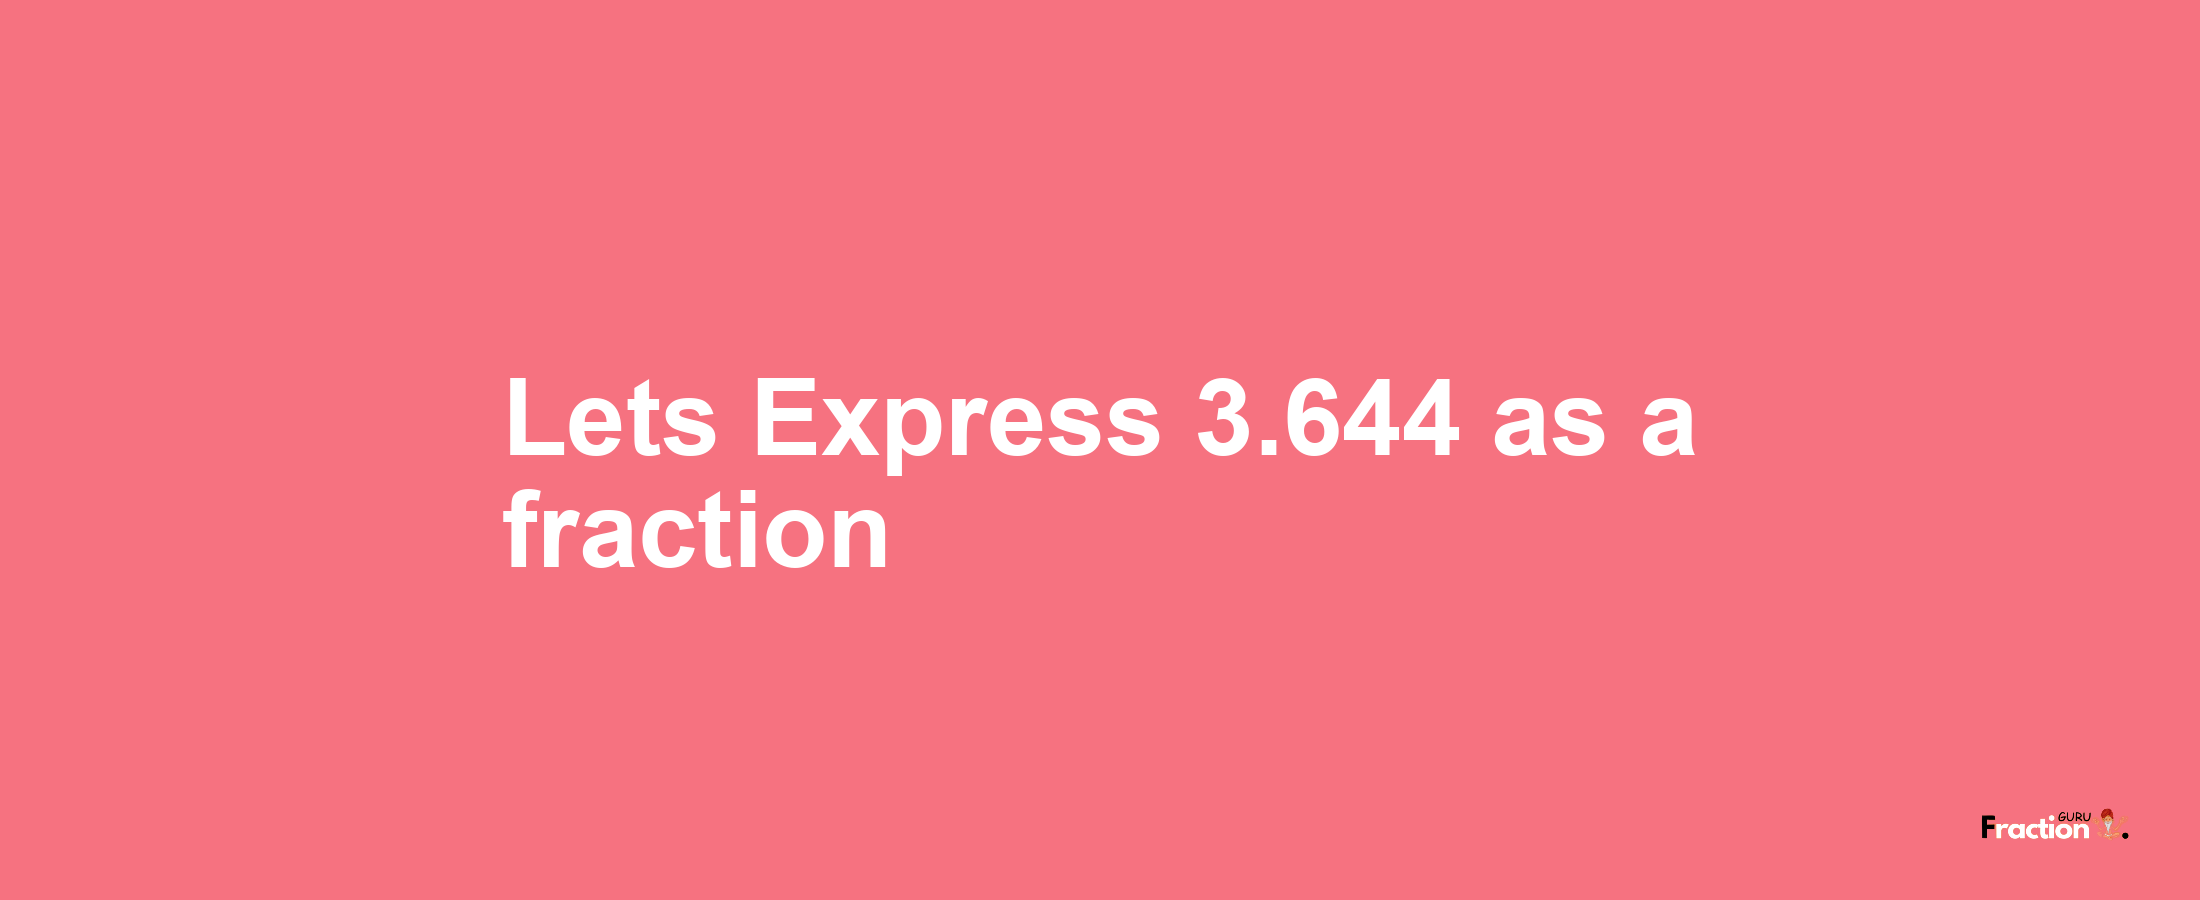 Lets Express 3.644 as afraction